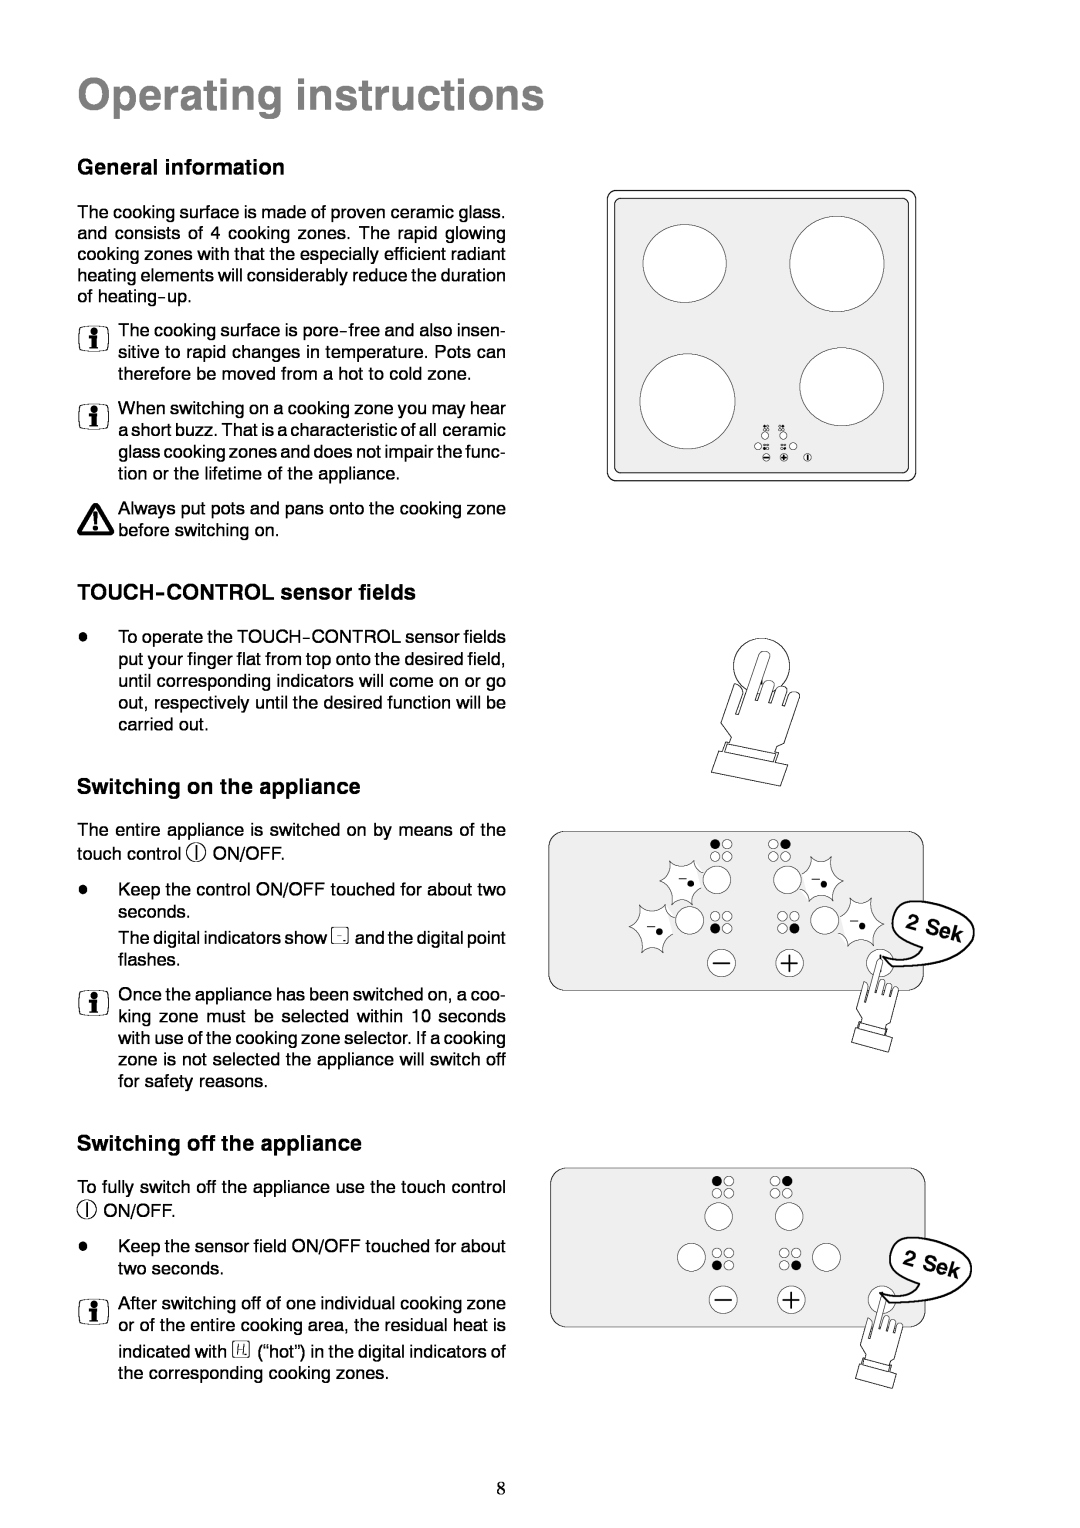 Zanussi ZKT 622 HN Operating instructions, General information, TOUCH-CONTROL sensor fields, Switching on the appliance 